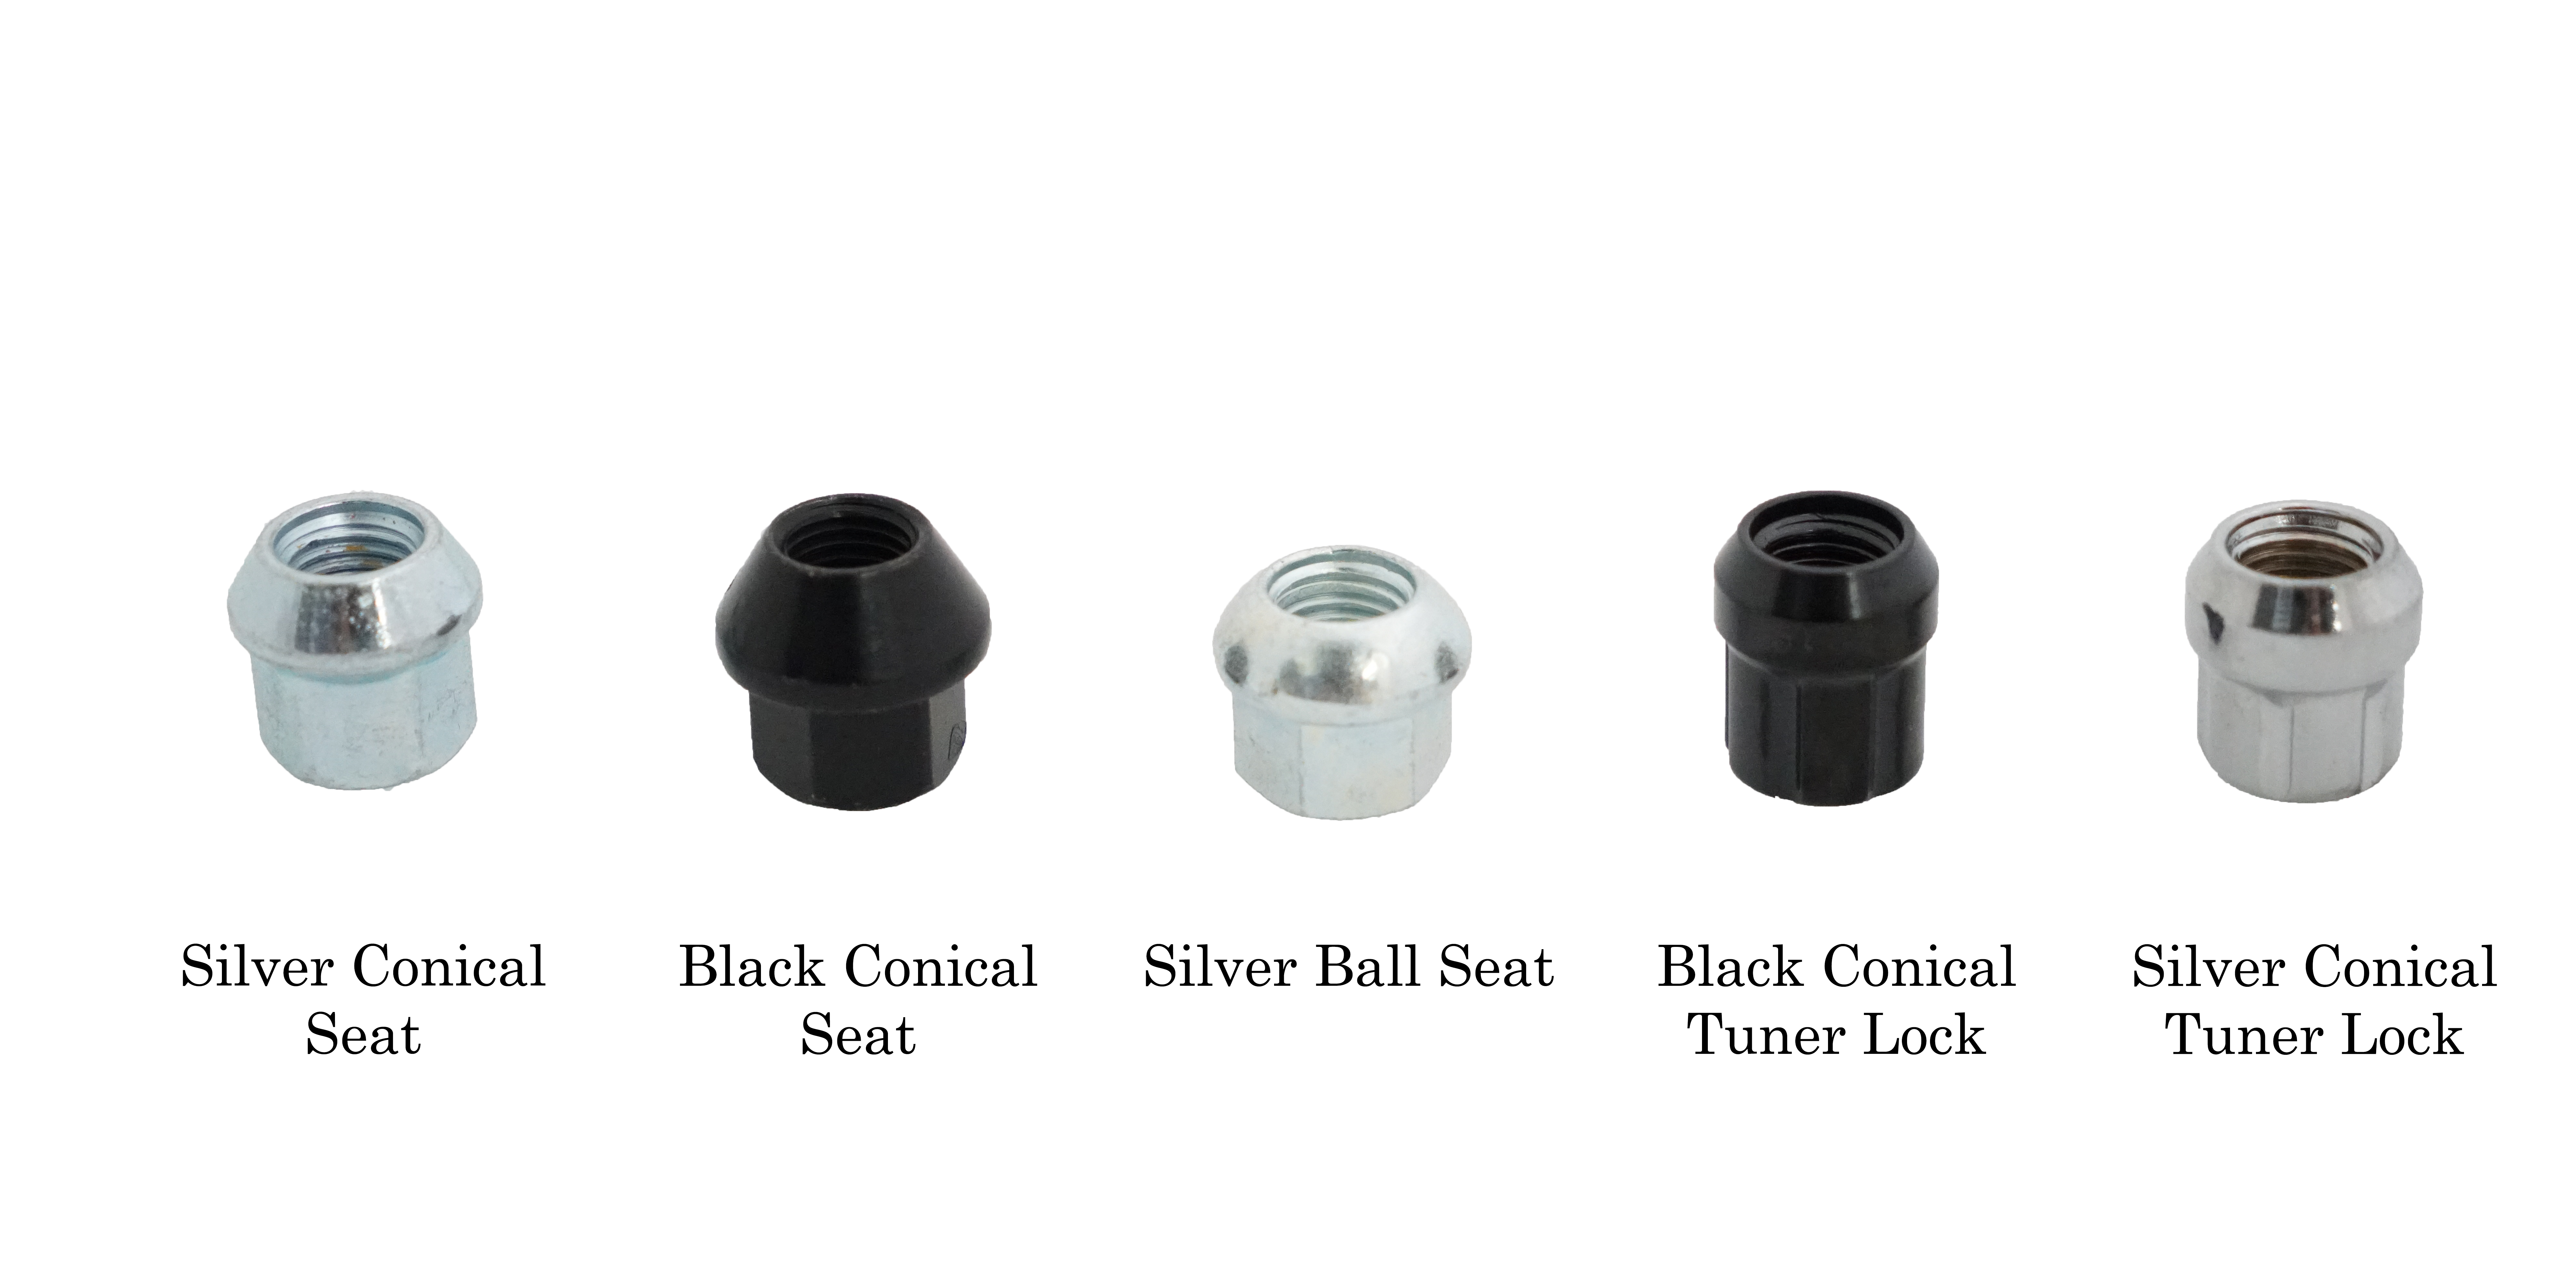 60 Conical Seat Richeer 20 PCS Black 14x1.5 Wheel Lug Bolts for Wheel Spacers 28mm Shank Length 58mm Overall Length 